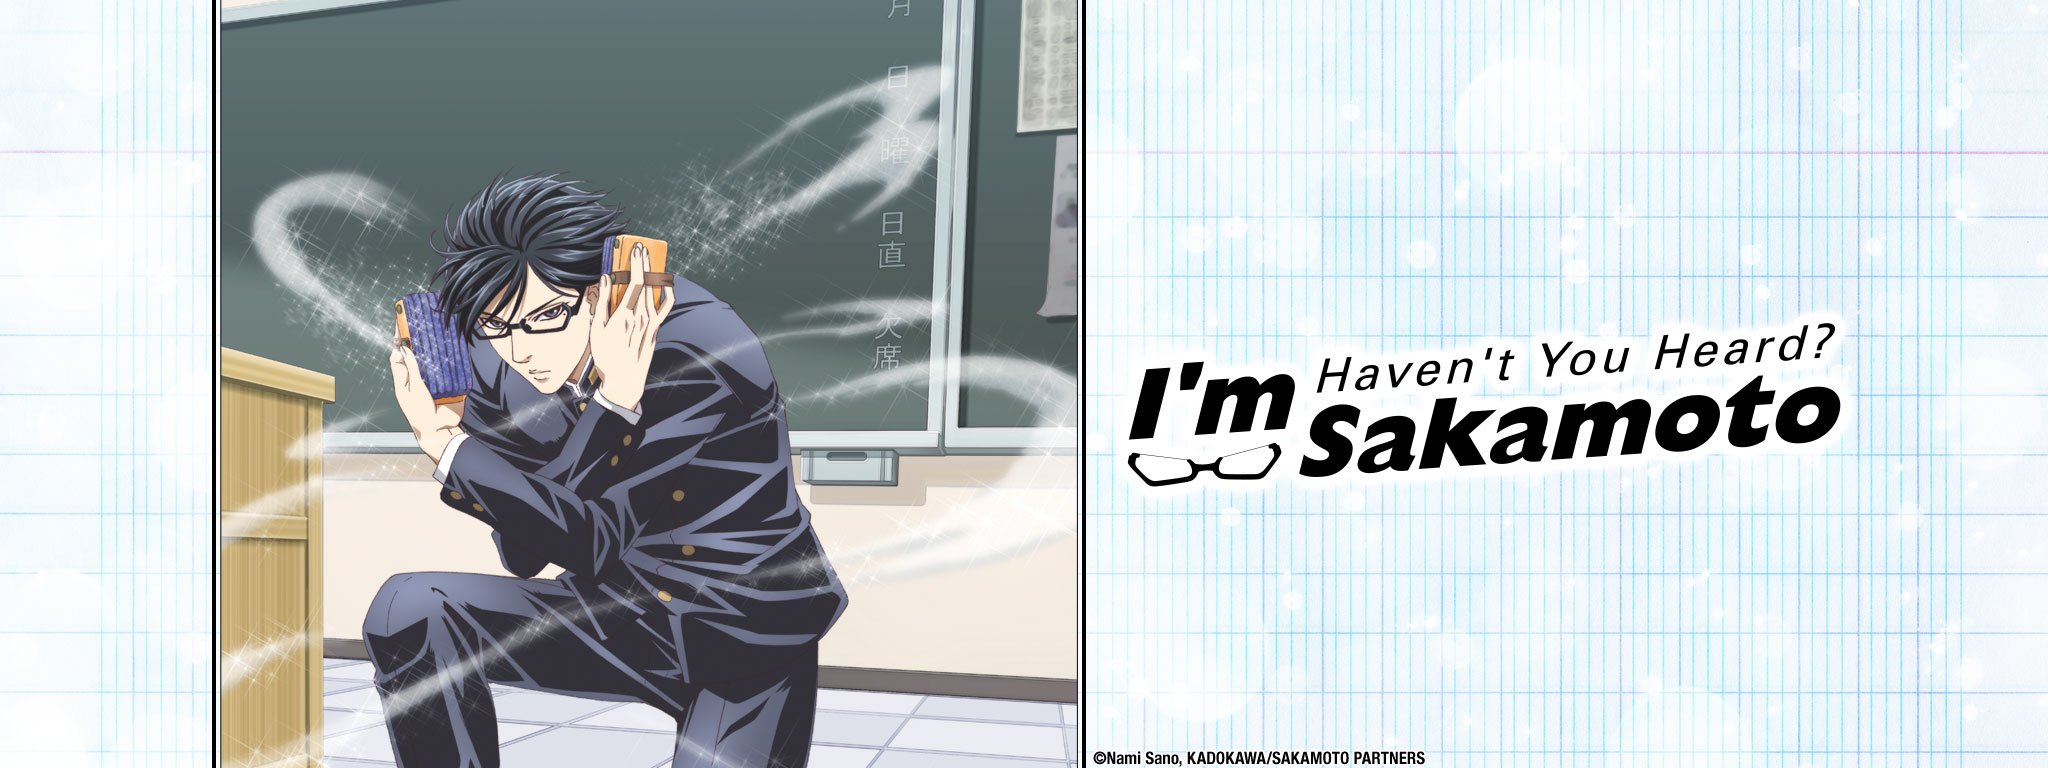 Title Art for Haven’t You Heard? I’m Sakamoto